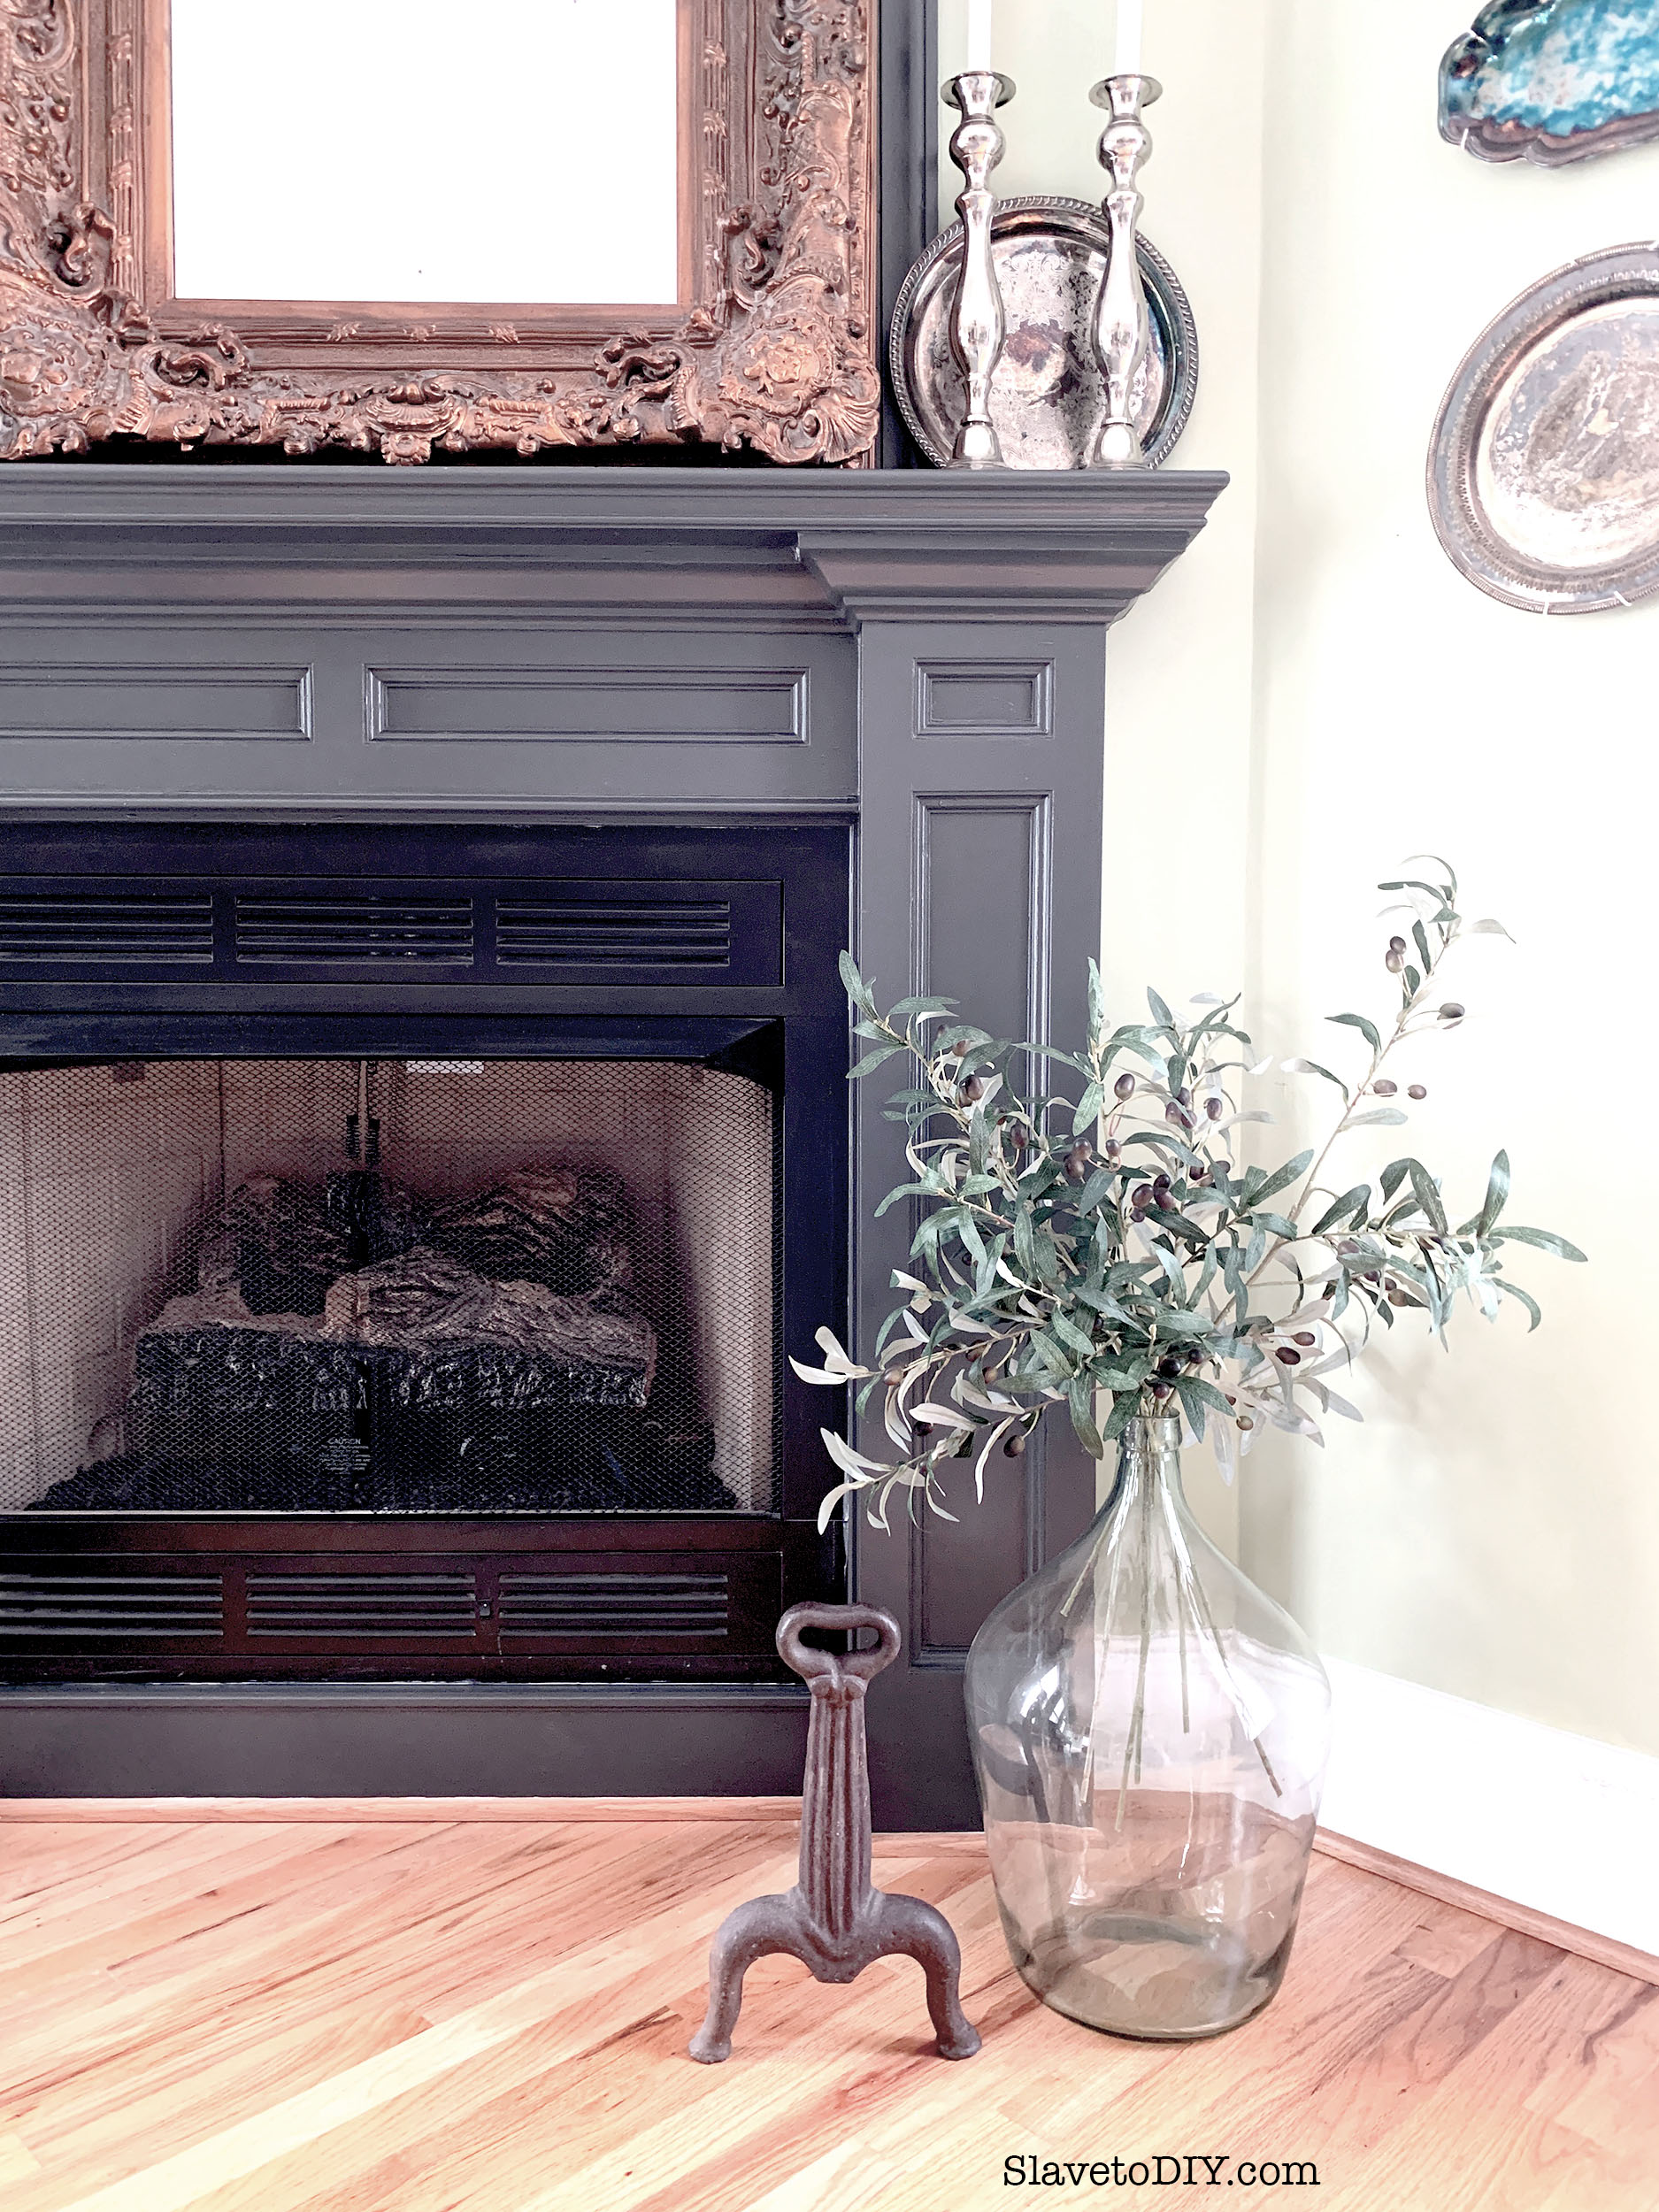 The Dark and Moody Fireplace Update